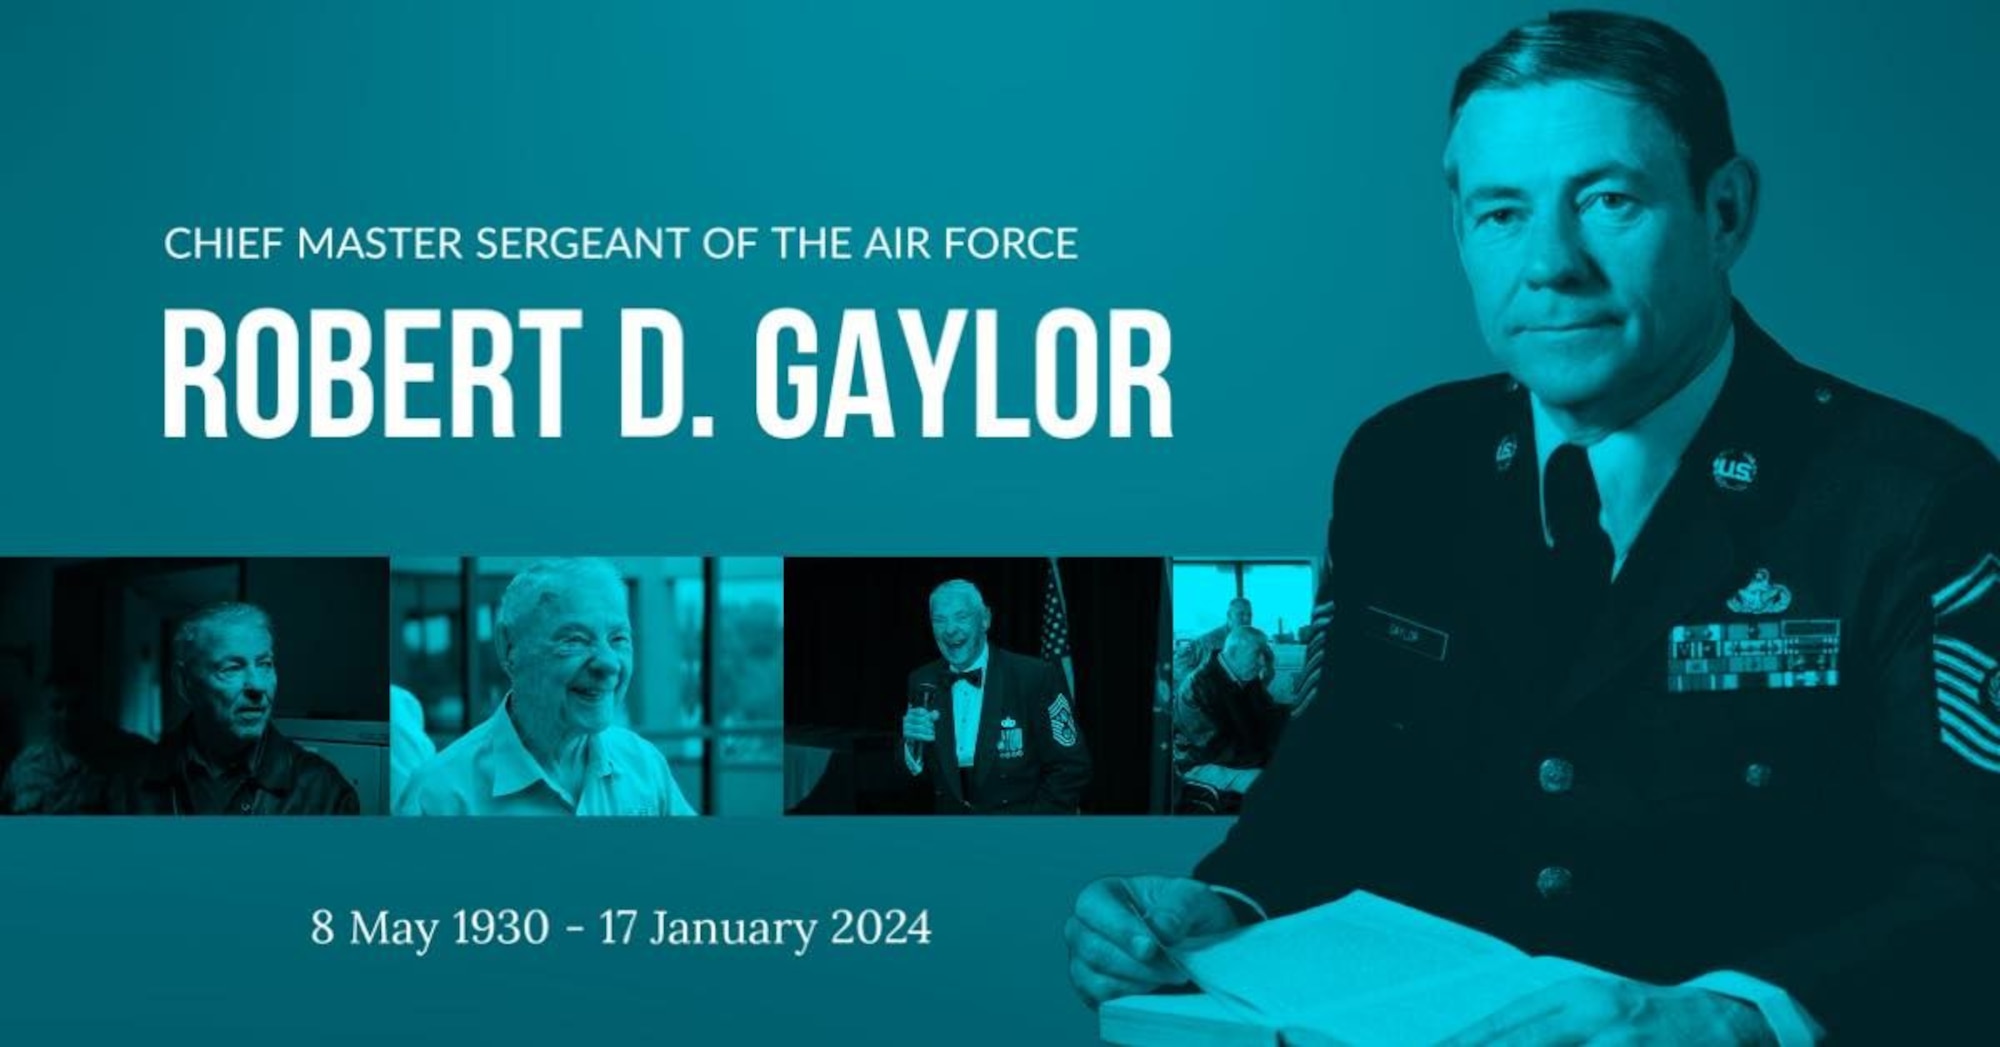 Robert D. Gaylor, the fifth Chief Master Sergeant of the Air Force, passed away Jan. 17, at the age of 93. Among his numerous achievements as CMSAF, he played a significant role in the creation of the Air Force’s new maternity uniform and pushed for a policy change allowing junior enlisted Airmen undergoing a permanent change of station to transport their families at the government’s expense. (U.S. Air Force photo)